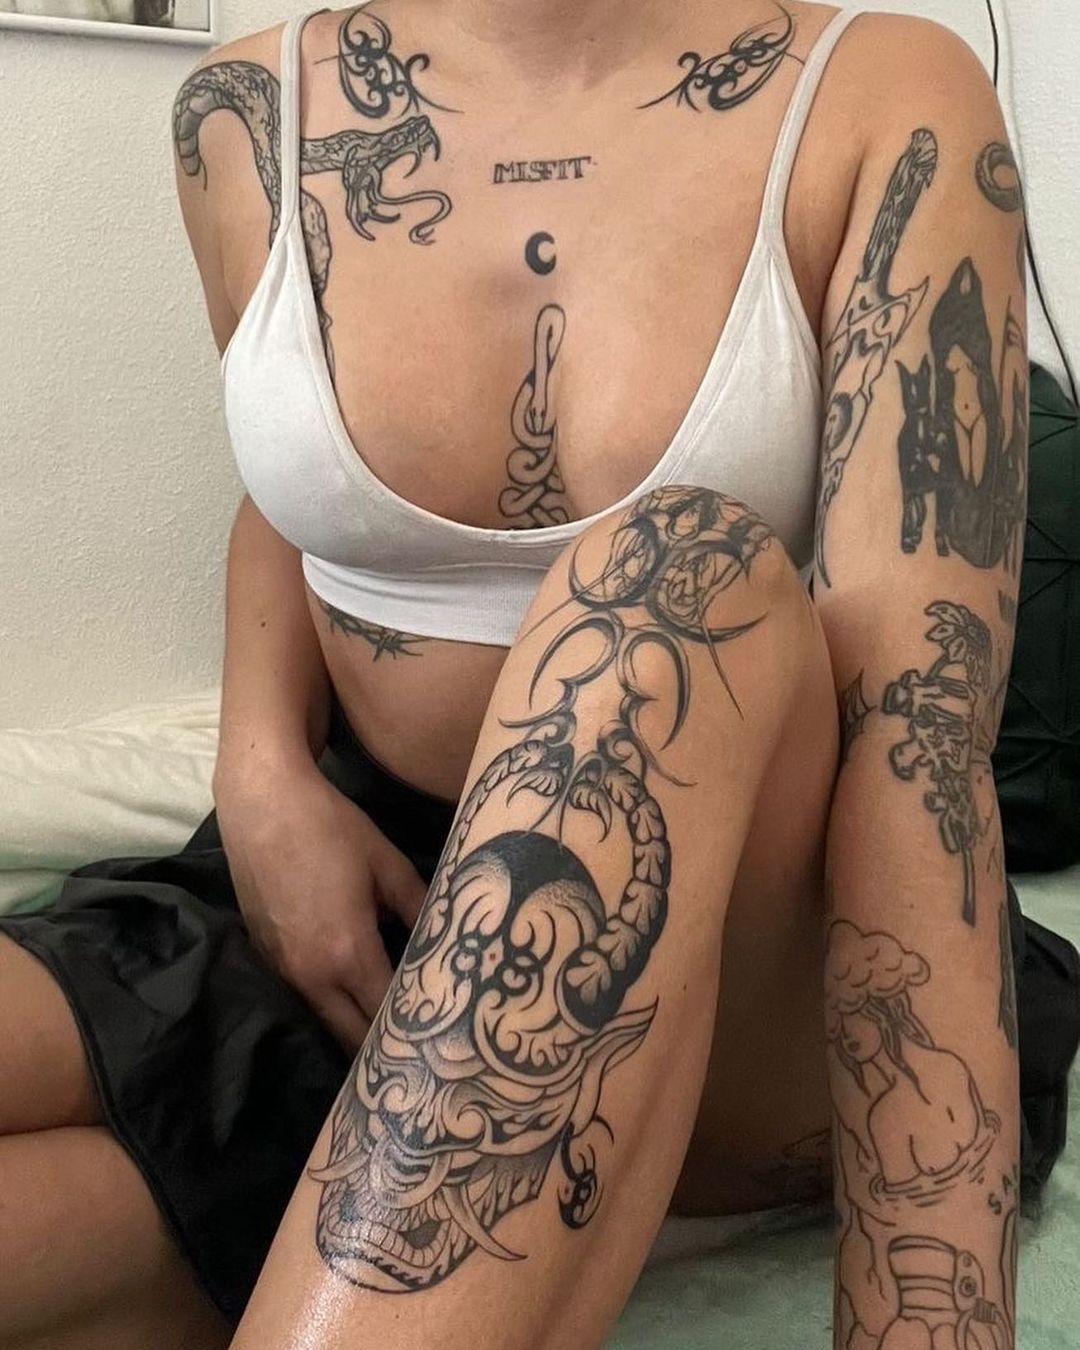 mei pang on how her tattoos